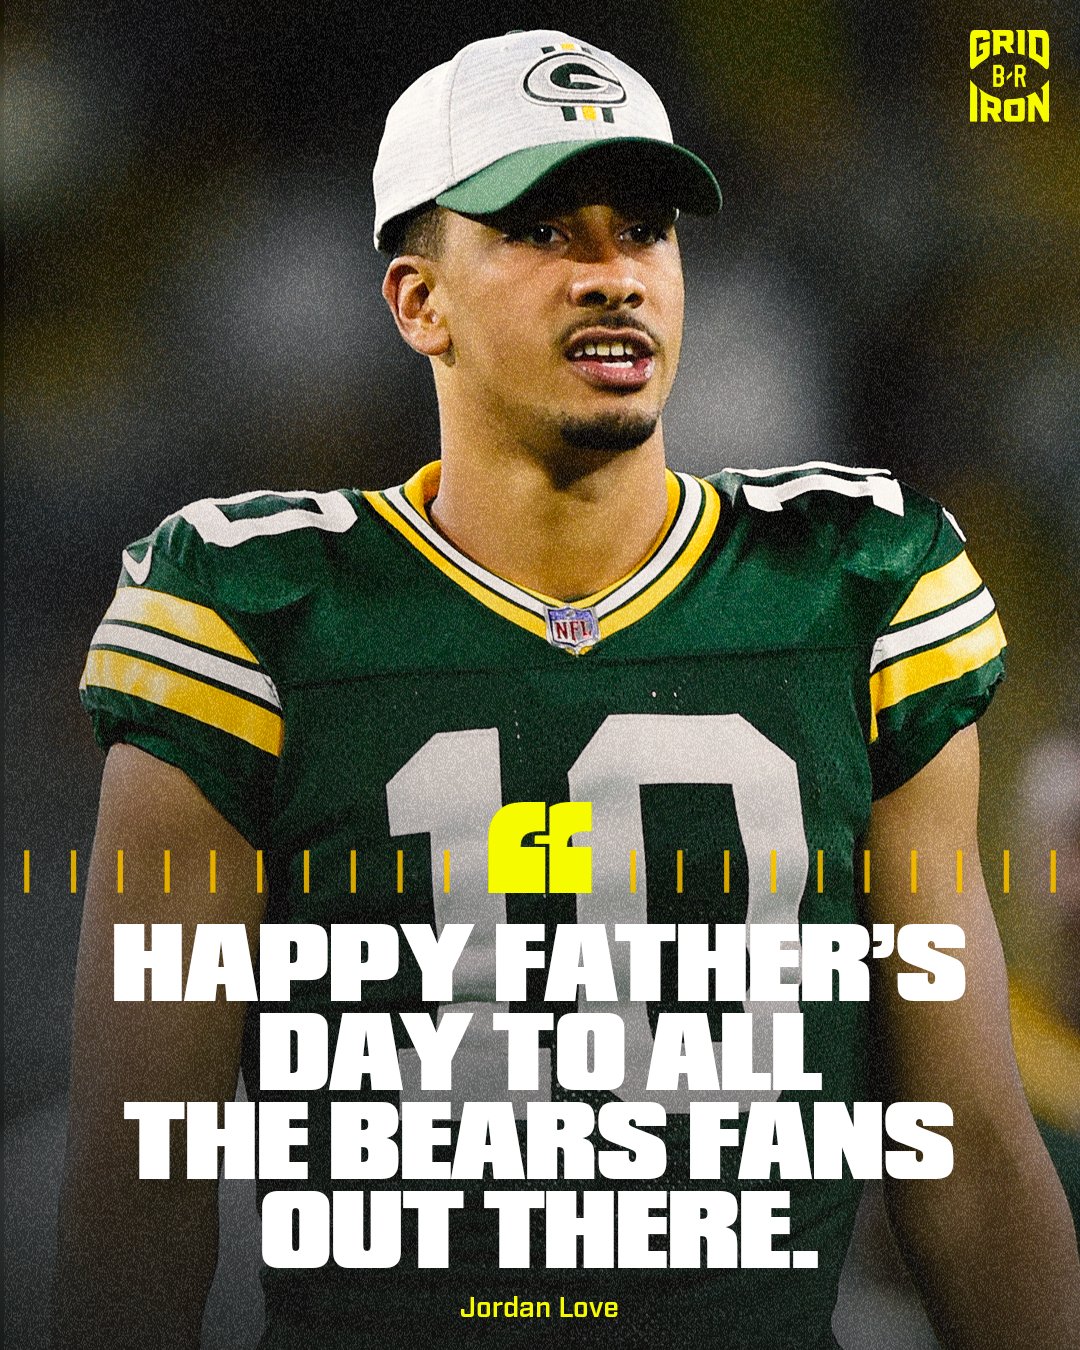 Big Cat on X: This doesn't even make sense. Is he saying Bears fans are  his dad? I wouldn't wish my son a happy Father's Day. He's so lame he can't  even